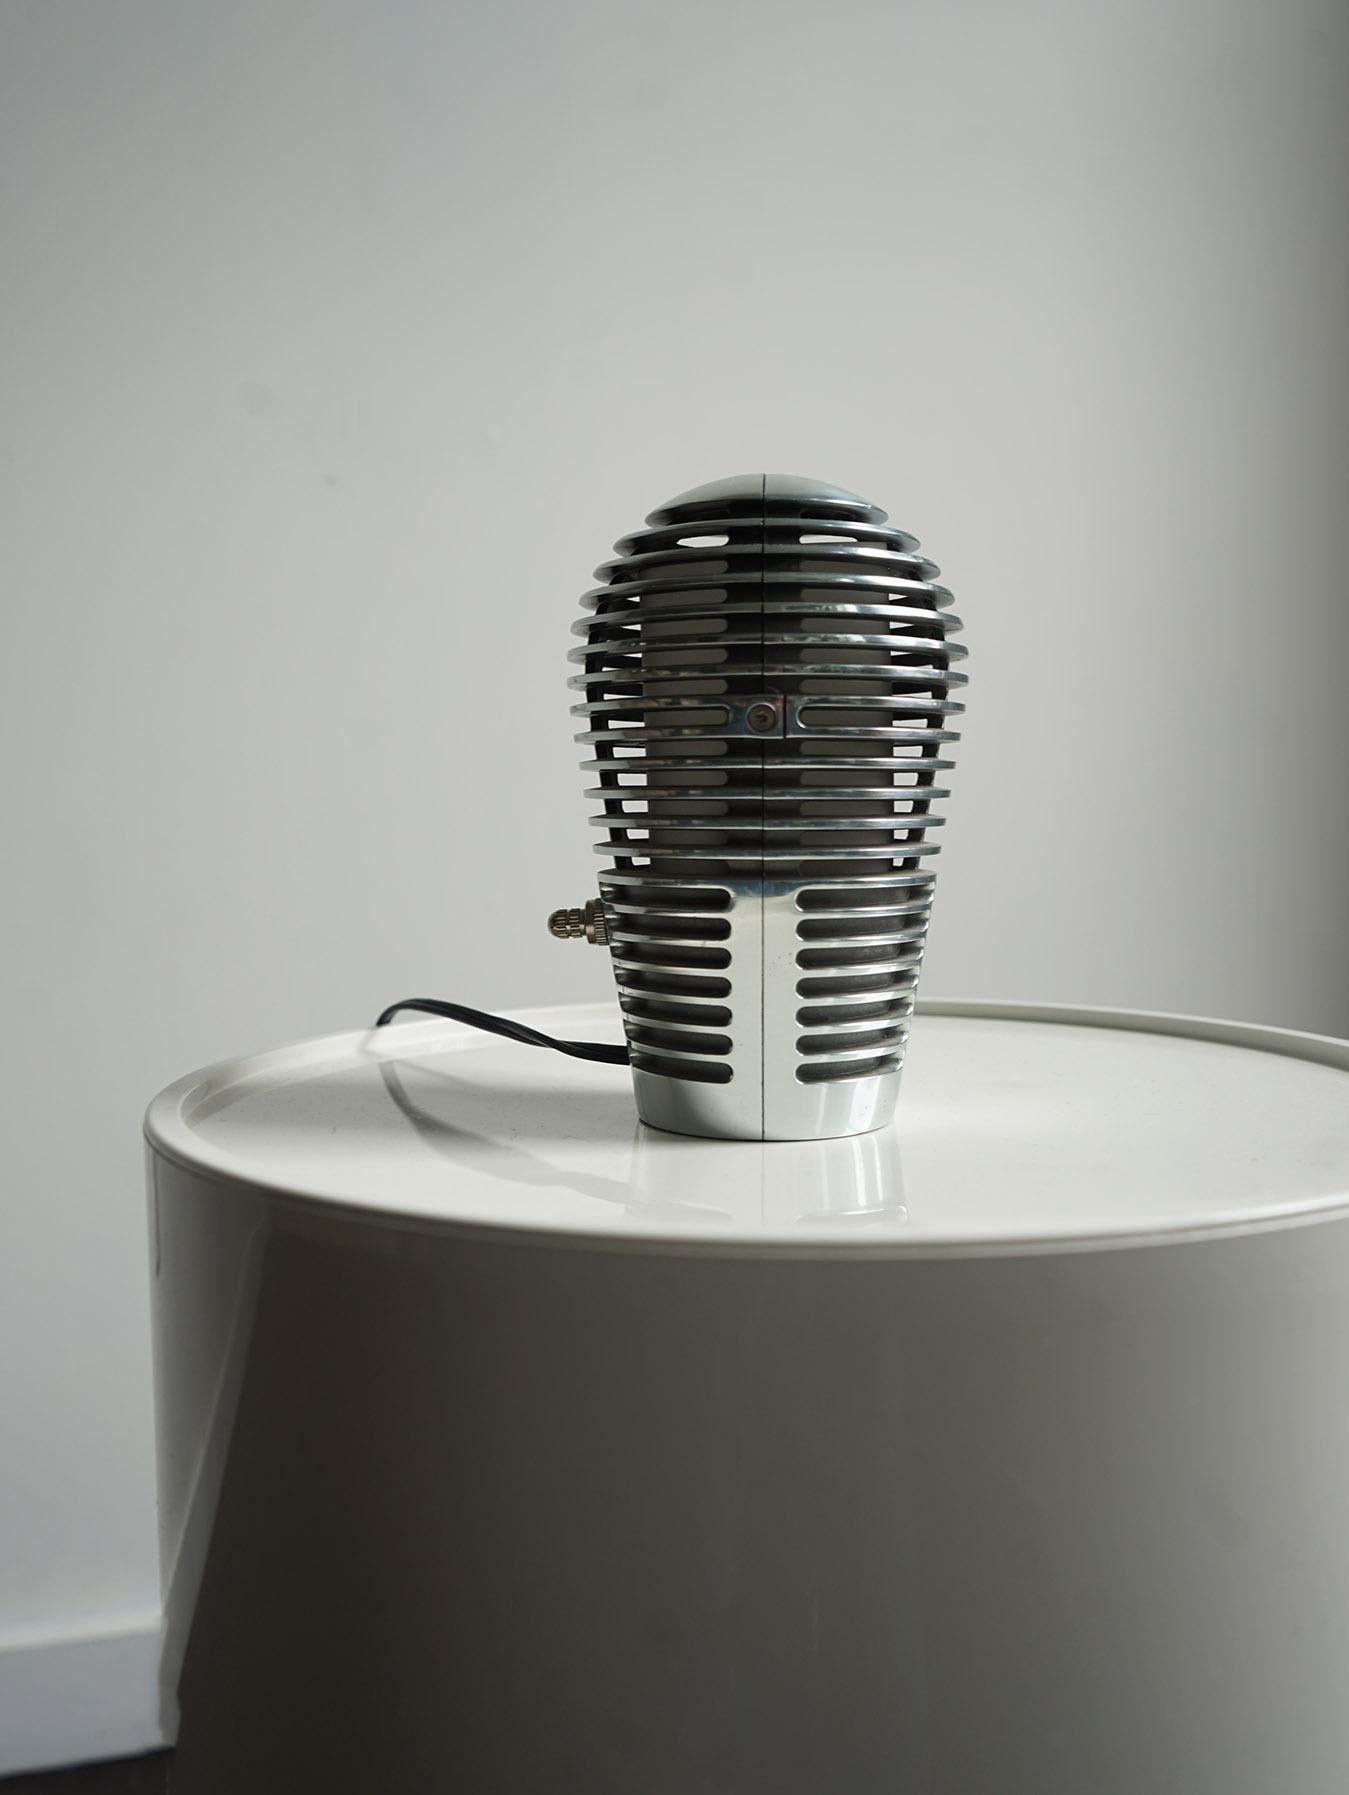 'Zen' aluminum table lamp created by the designer brothers Sergi and Oscar Devesa in the early 1990s. The piece is marked on the bottom and is in excellent vintage condition.